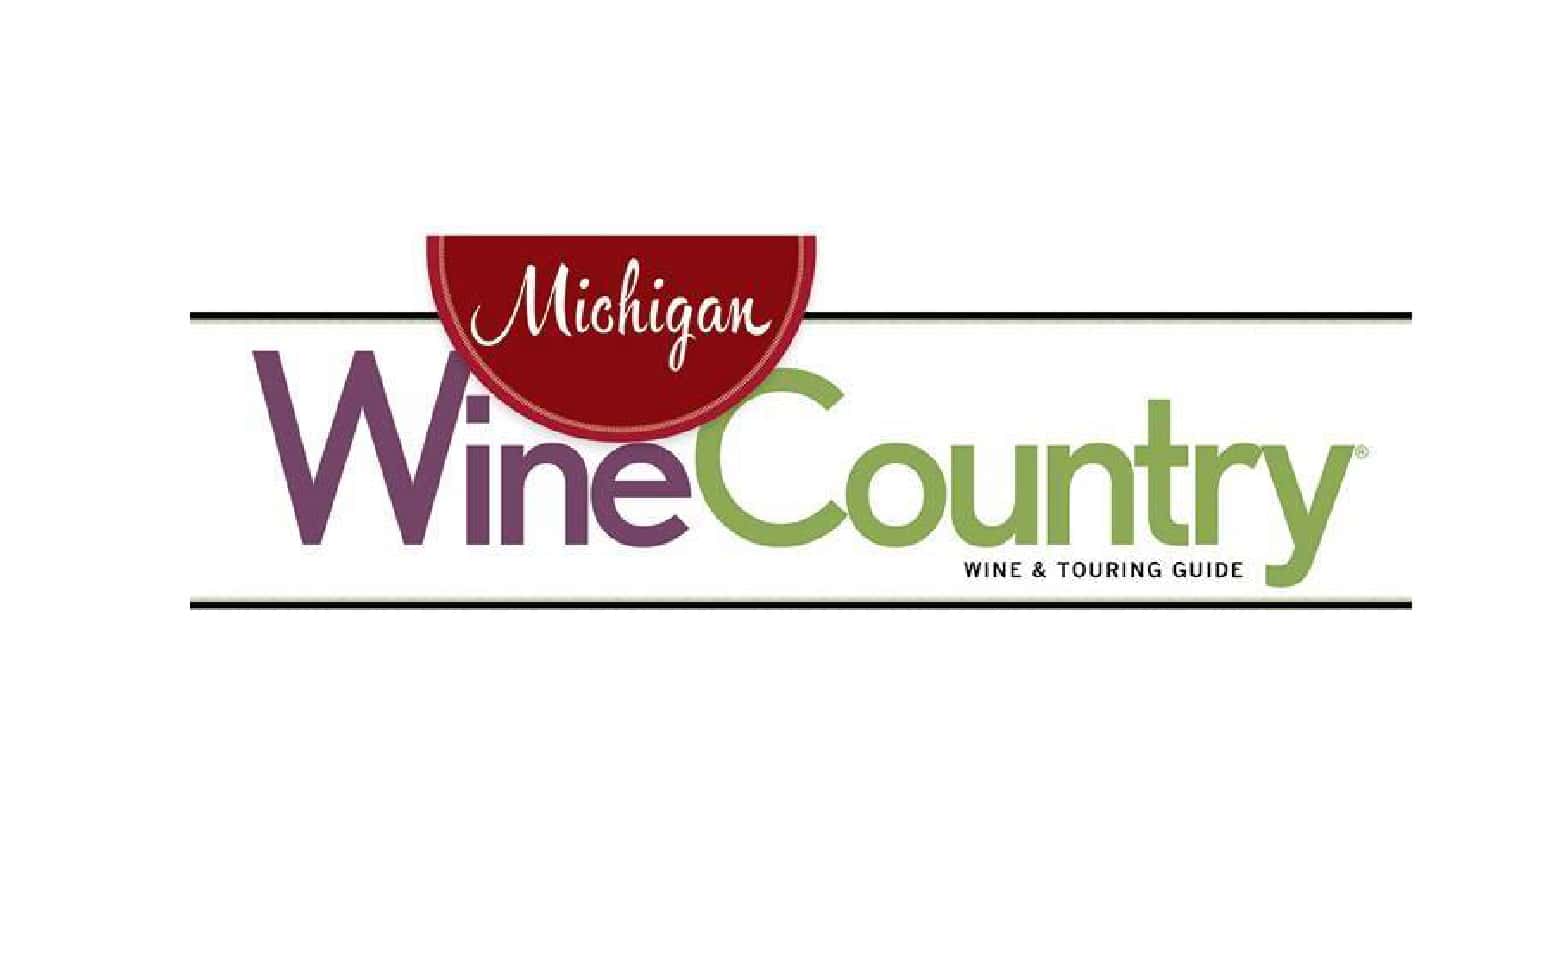 Michigan Wineries "Wish You Were Here," Issue Collective Video for Wine